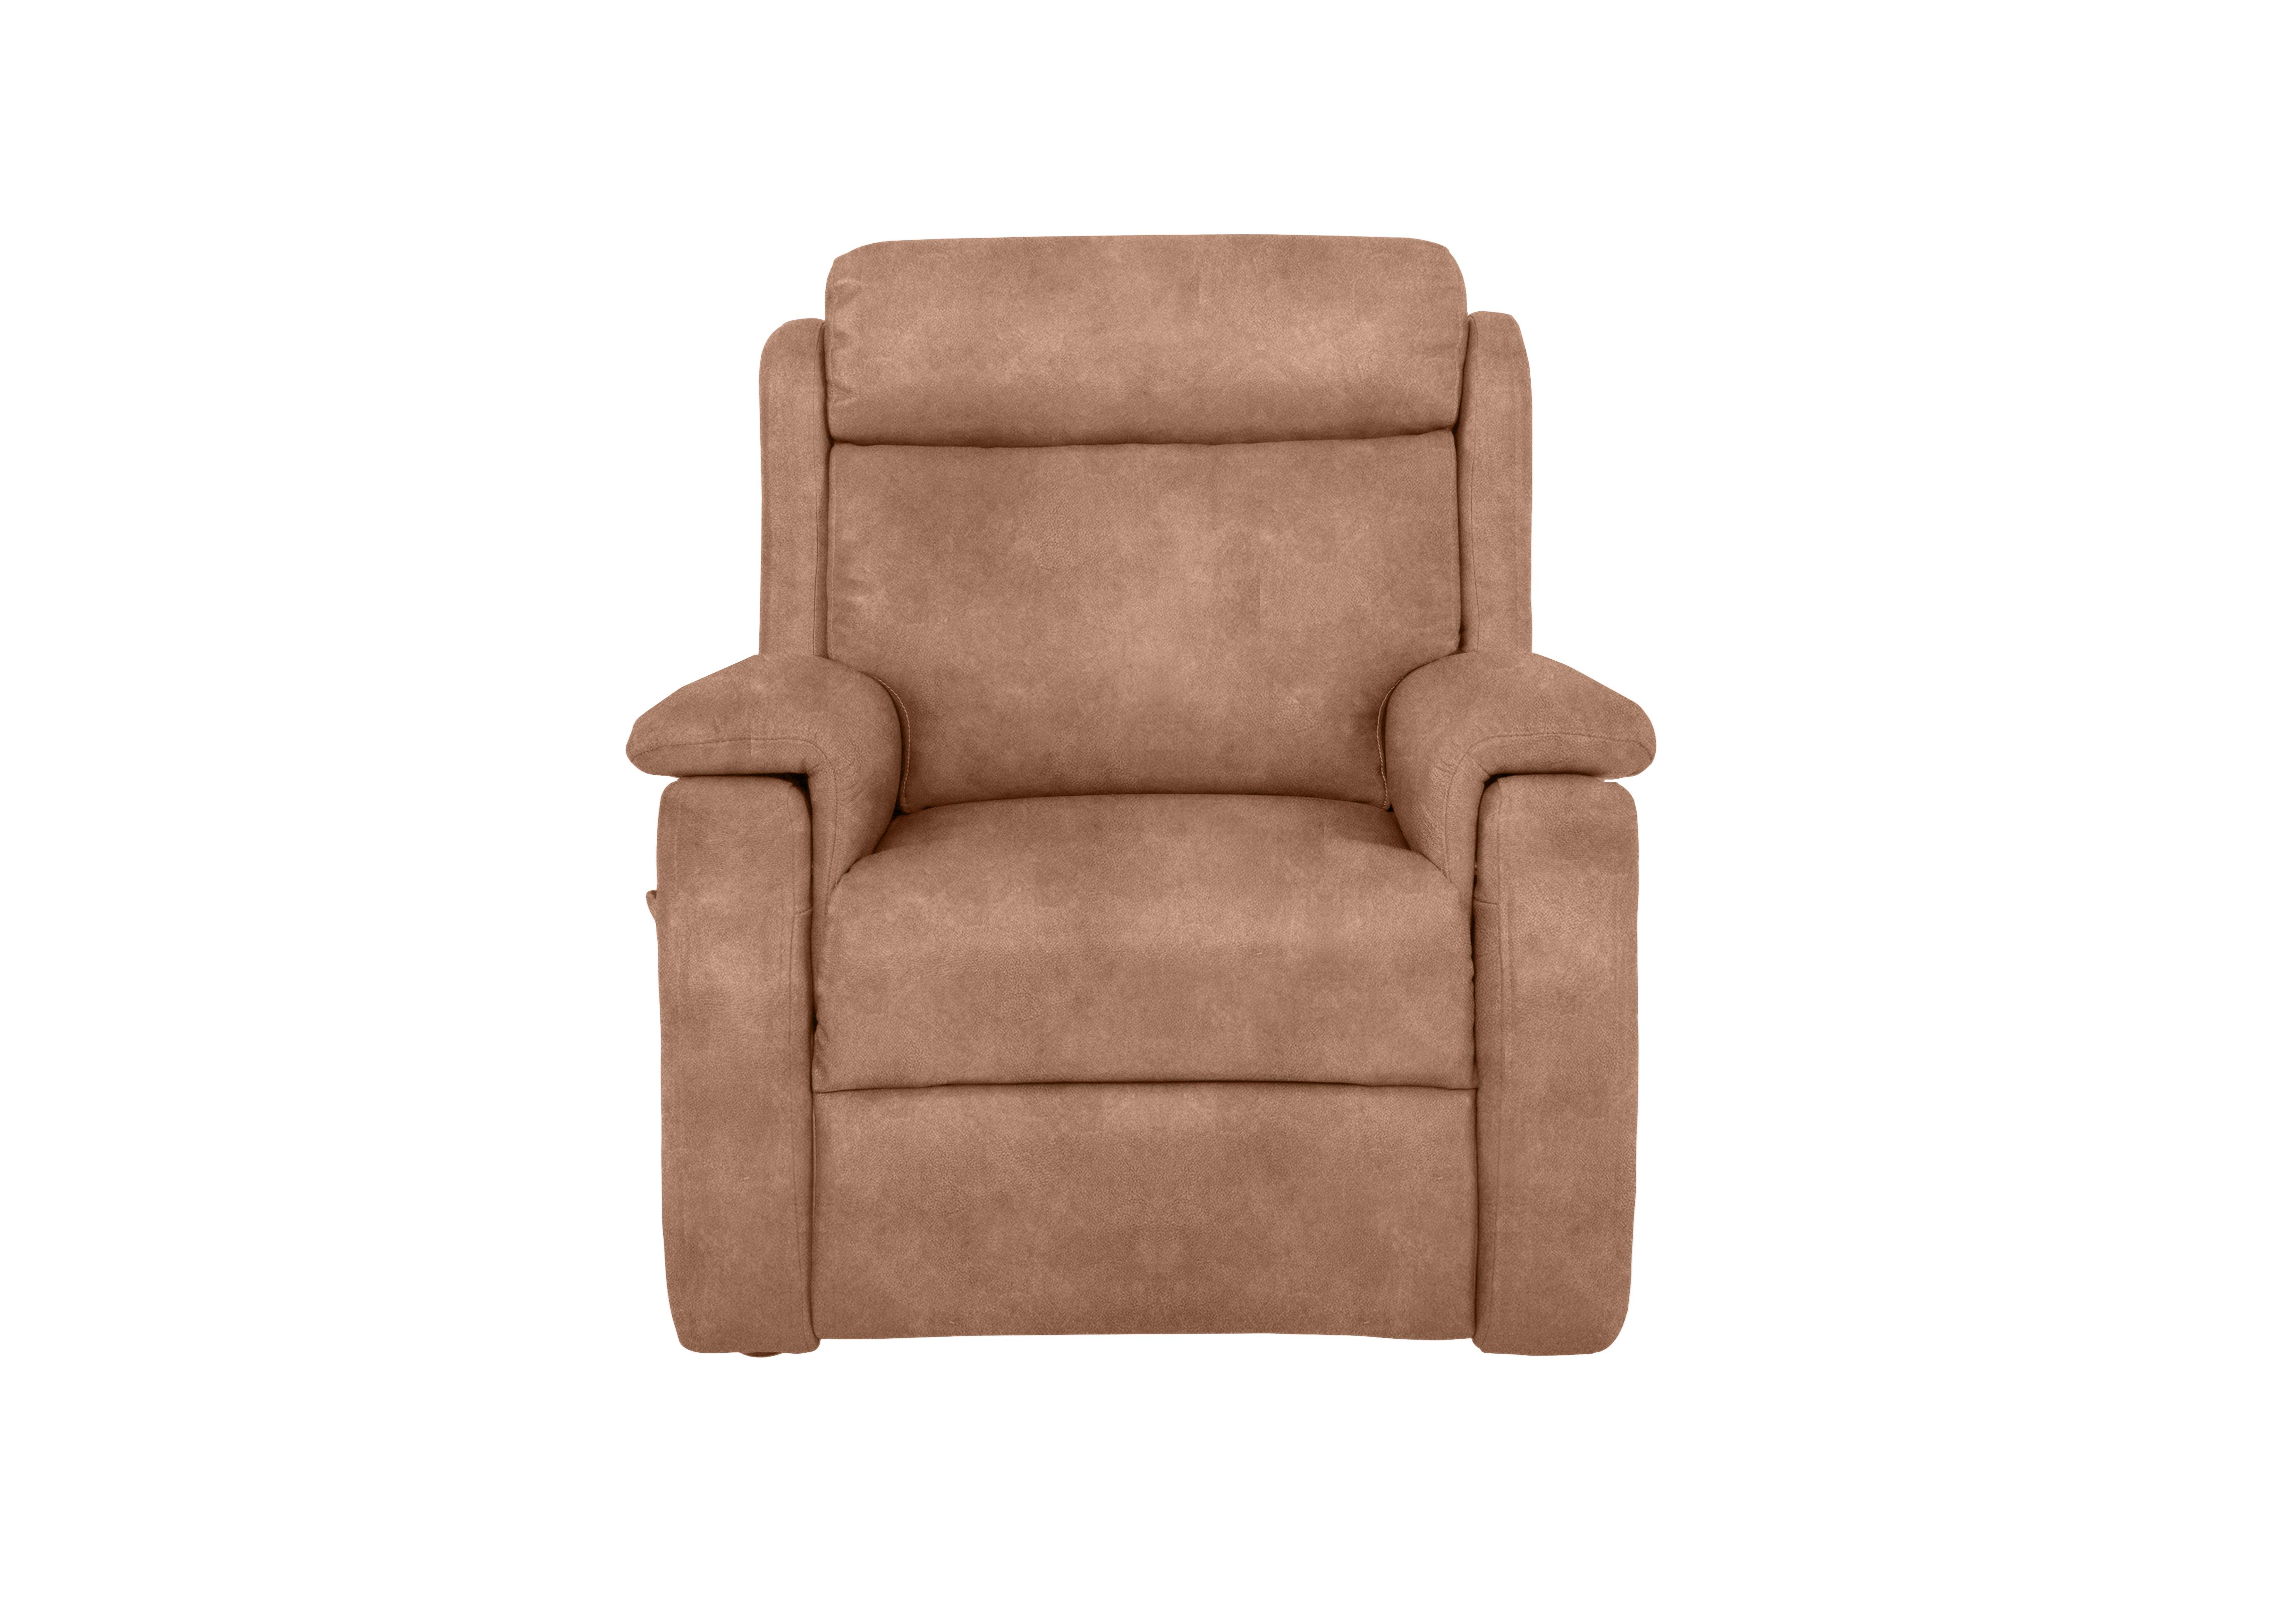 My Chair Kirk Fabric Lift and Rise Chair in 43507 Sand Dexter 07 on Furniture Village